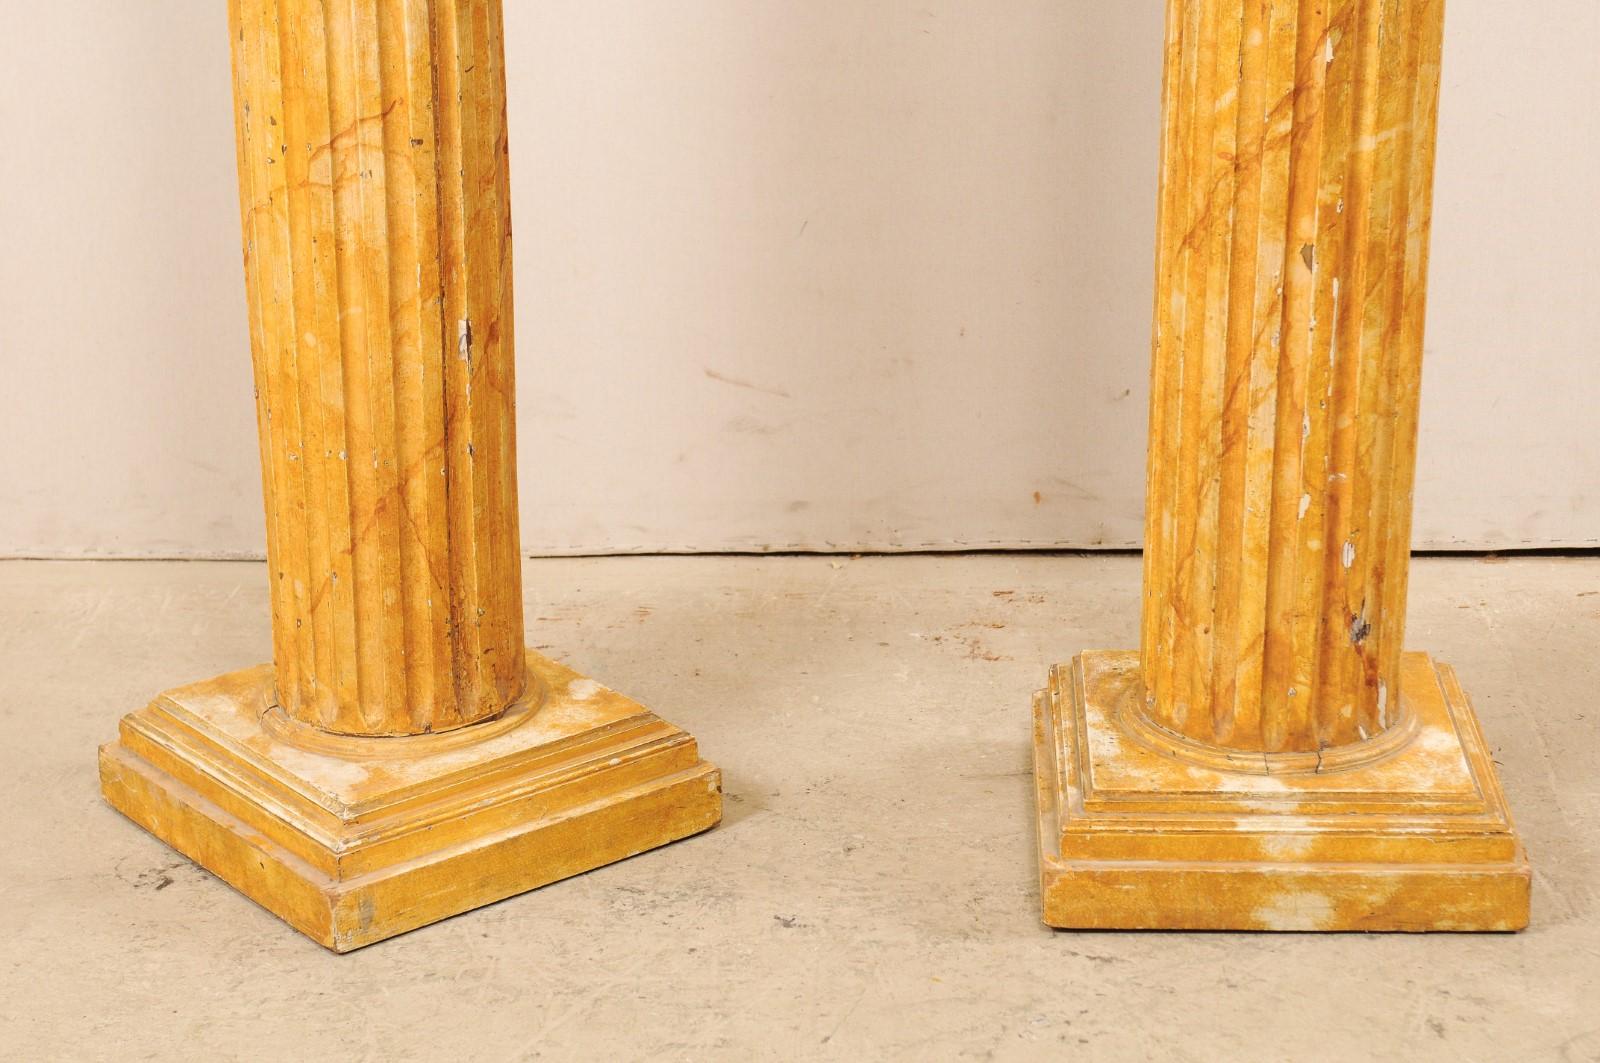 French Pair of Fluted Columns with Faux Marble Finish, Mid-20th Century For Sale 4